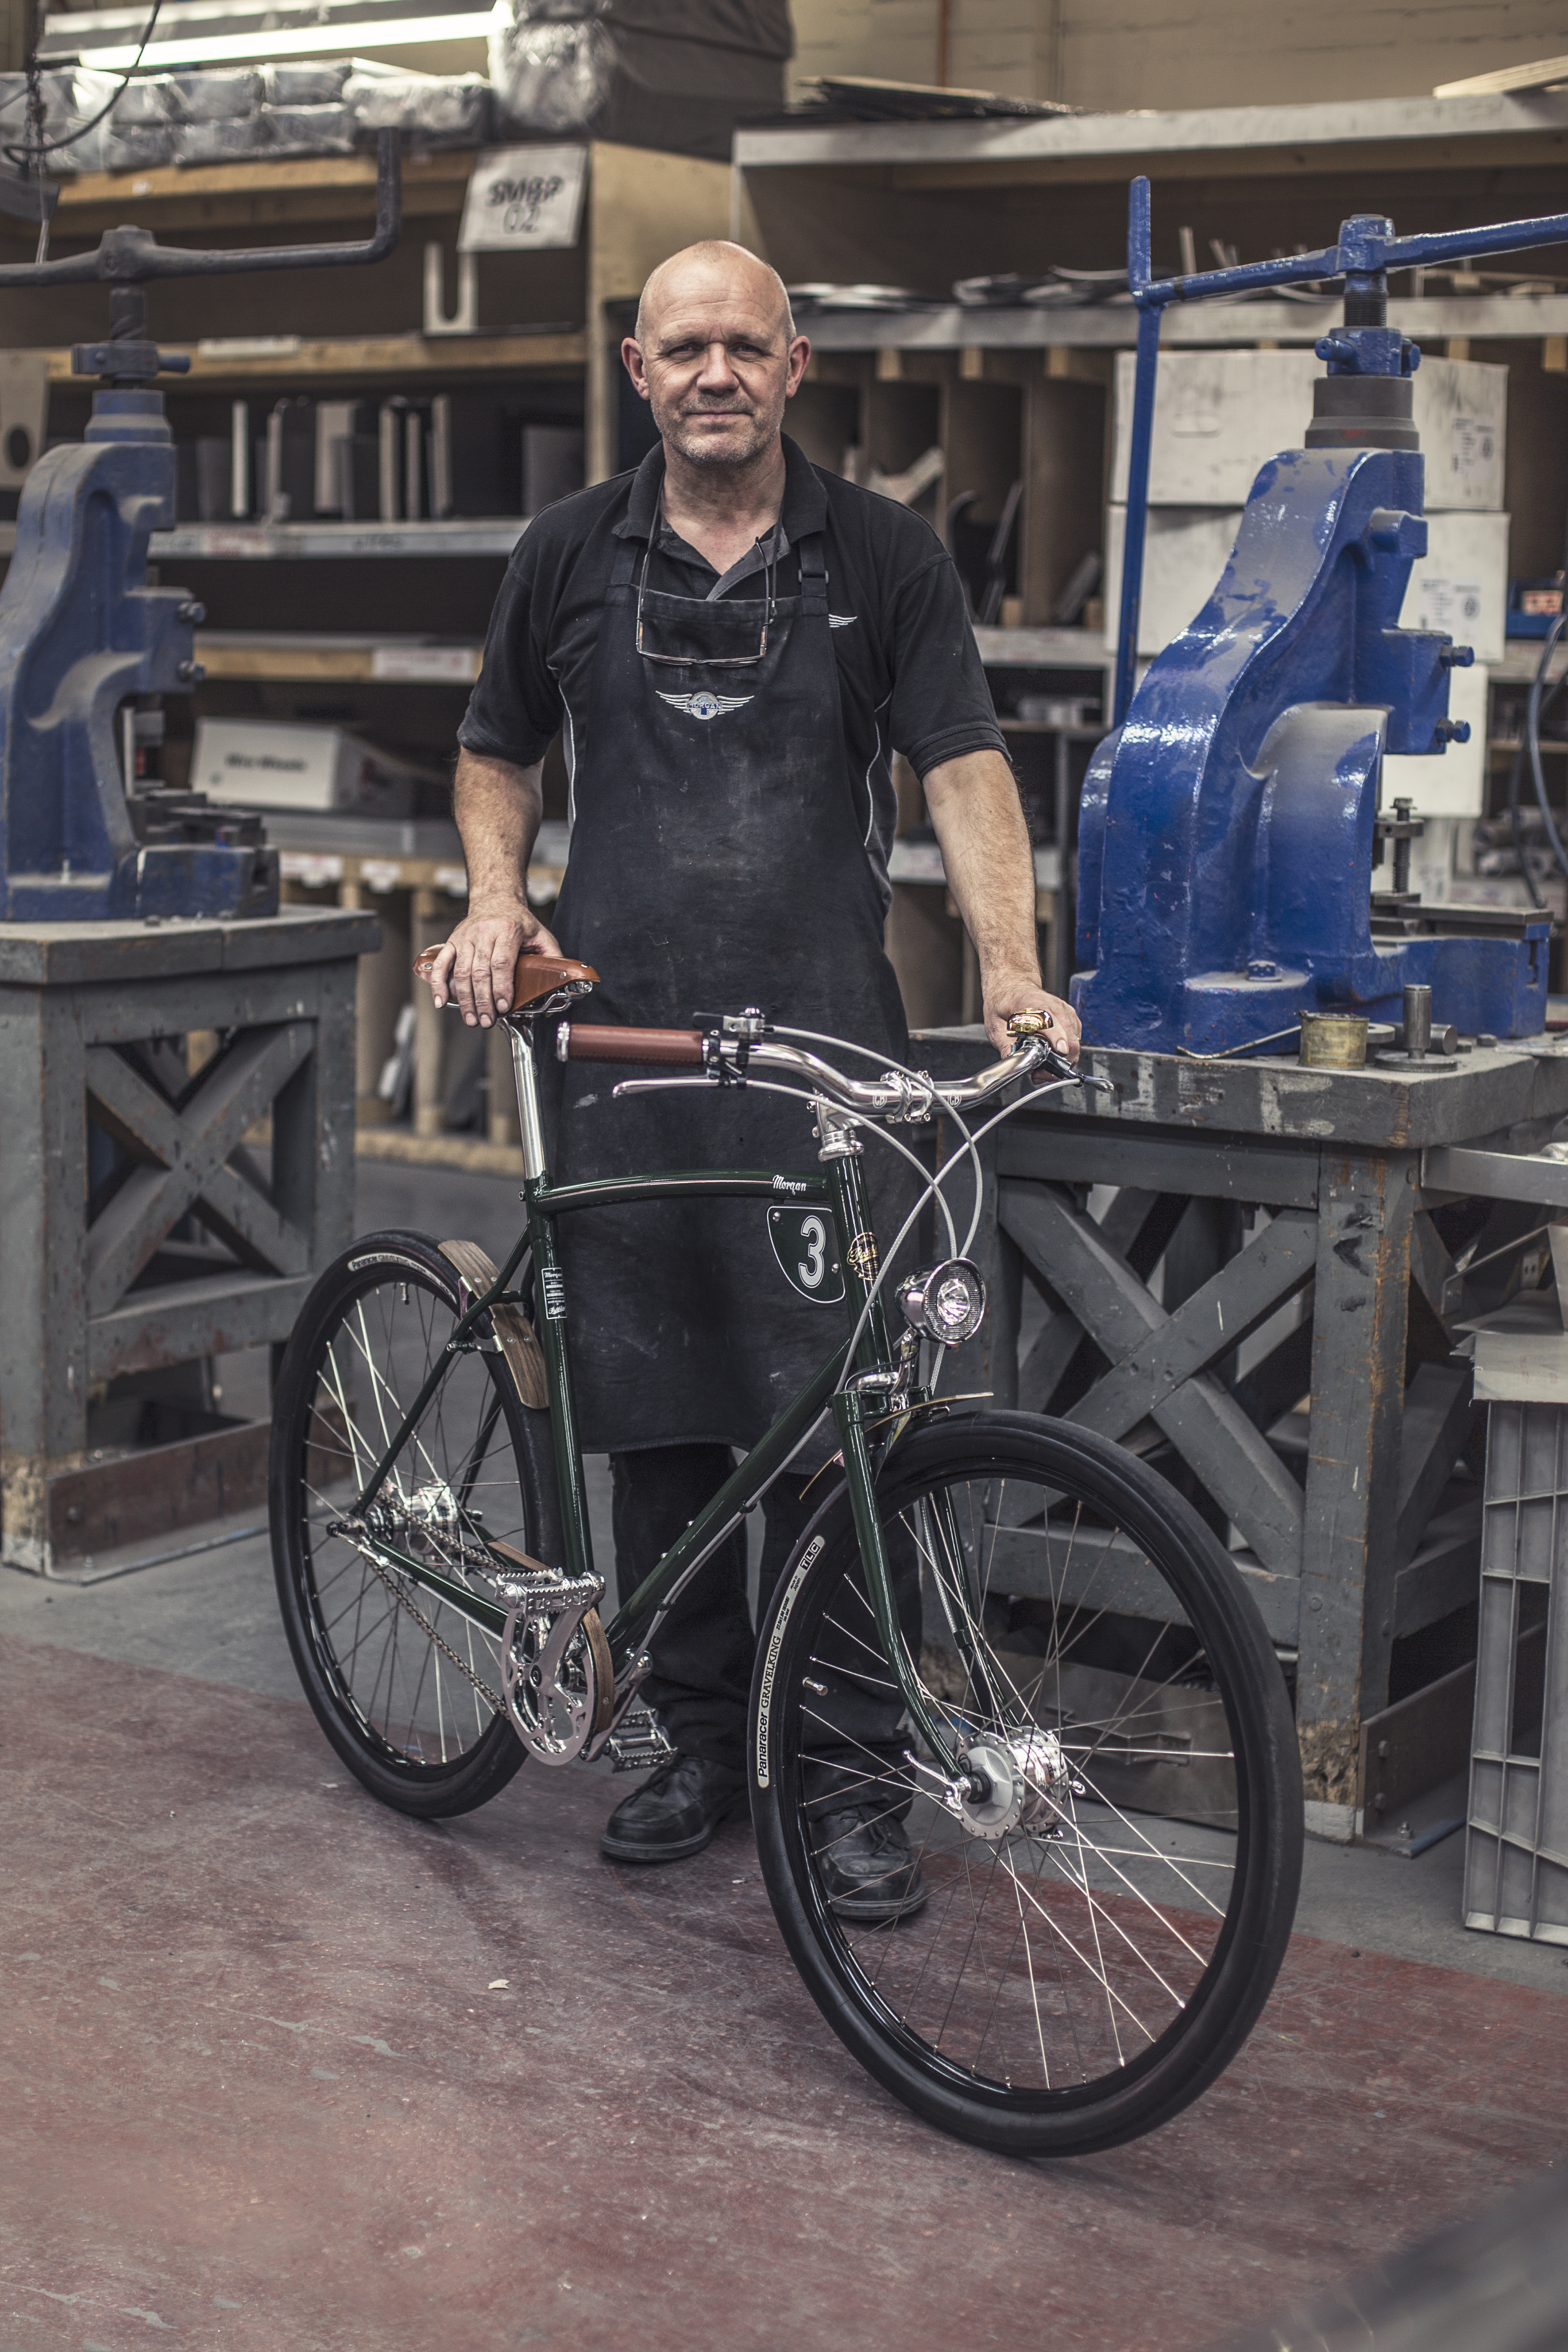 Sports Car PR: The Morgan Motor Company are excited to collaborate on two concept bicycles with a fellow British company, Pashley Cycles